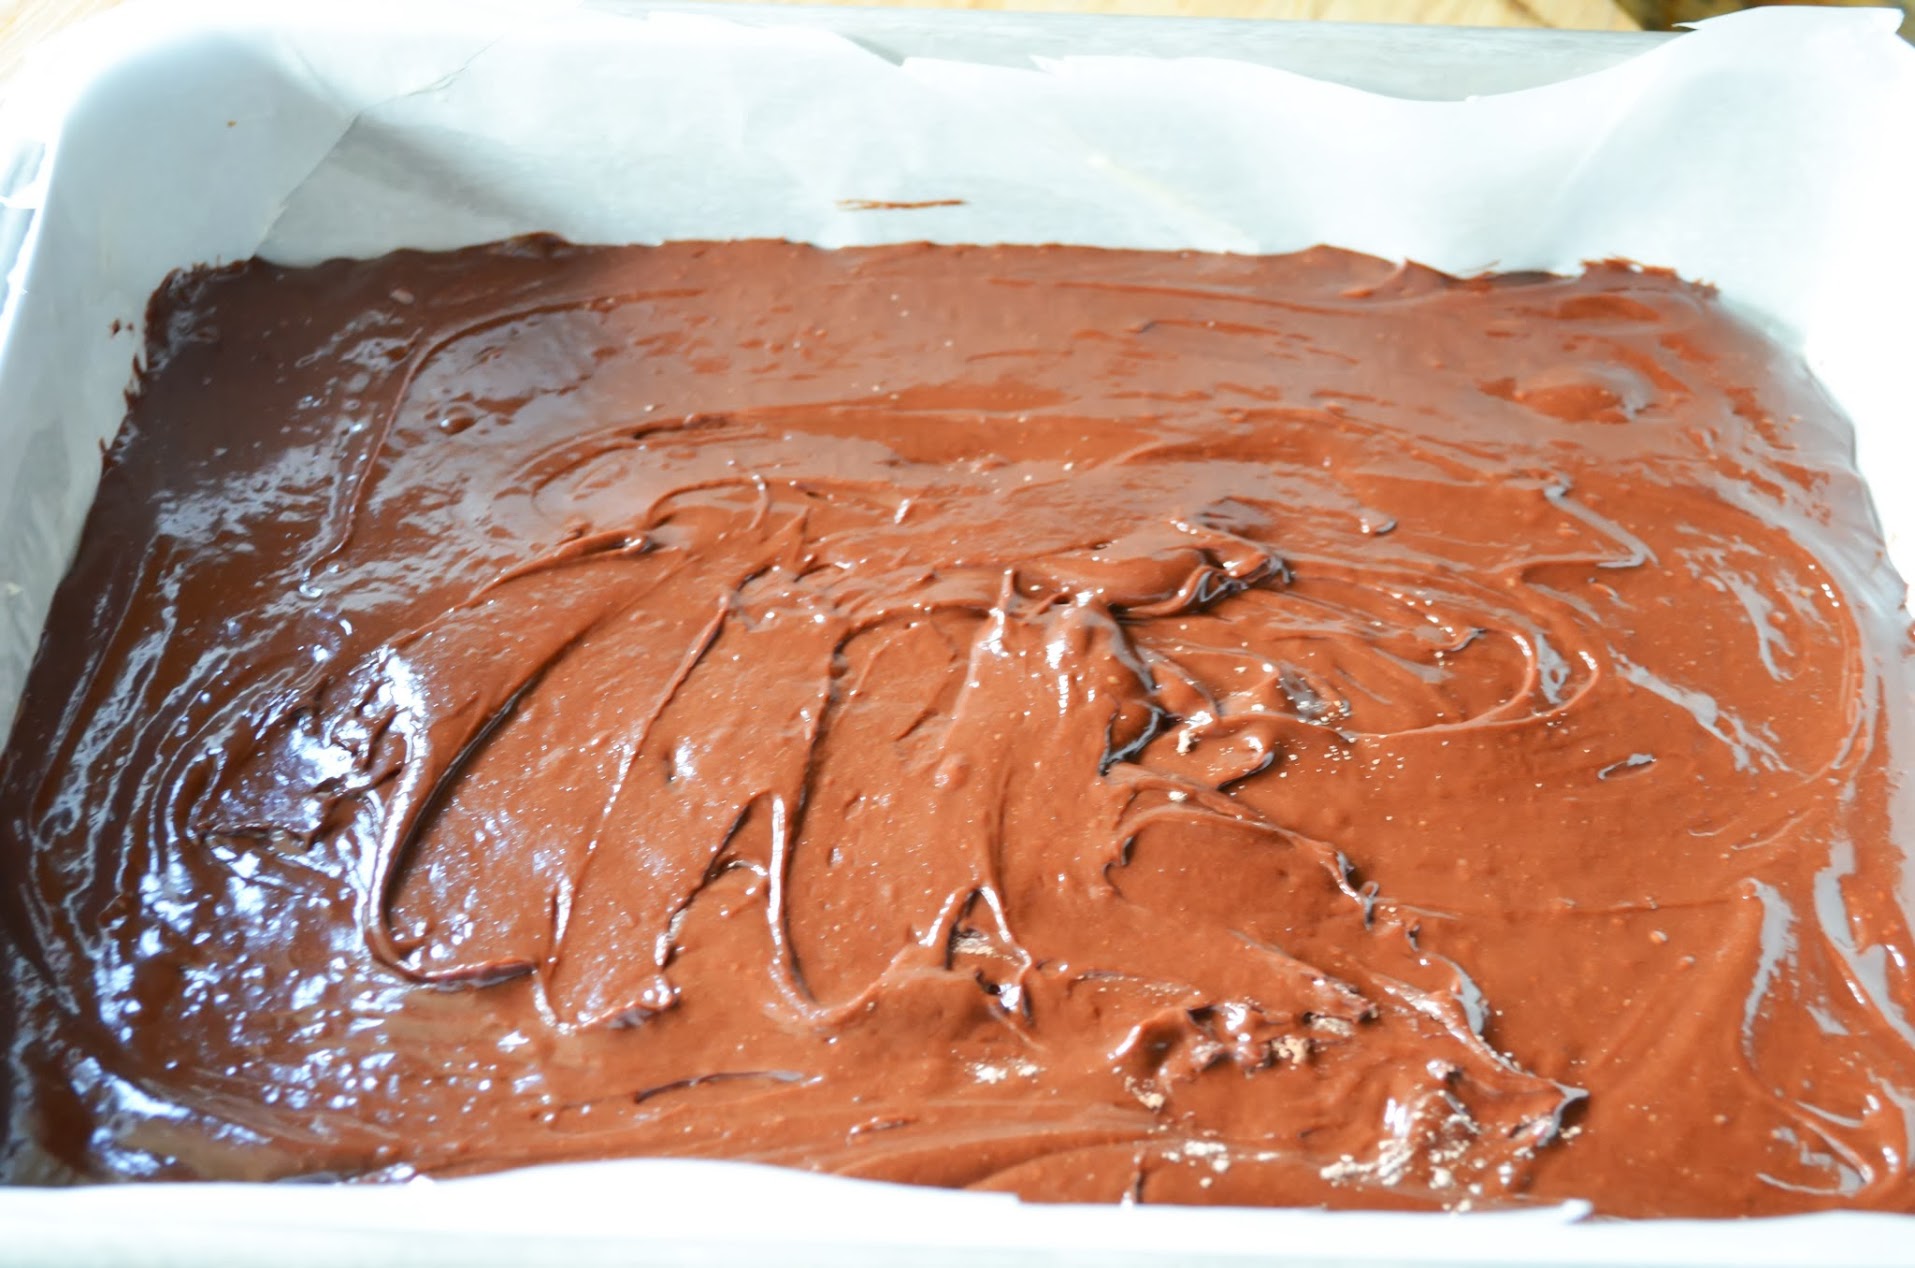 Peanut-Butter-Cup-Crunch-Brownies-Pour-Lined-Pan.jpg